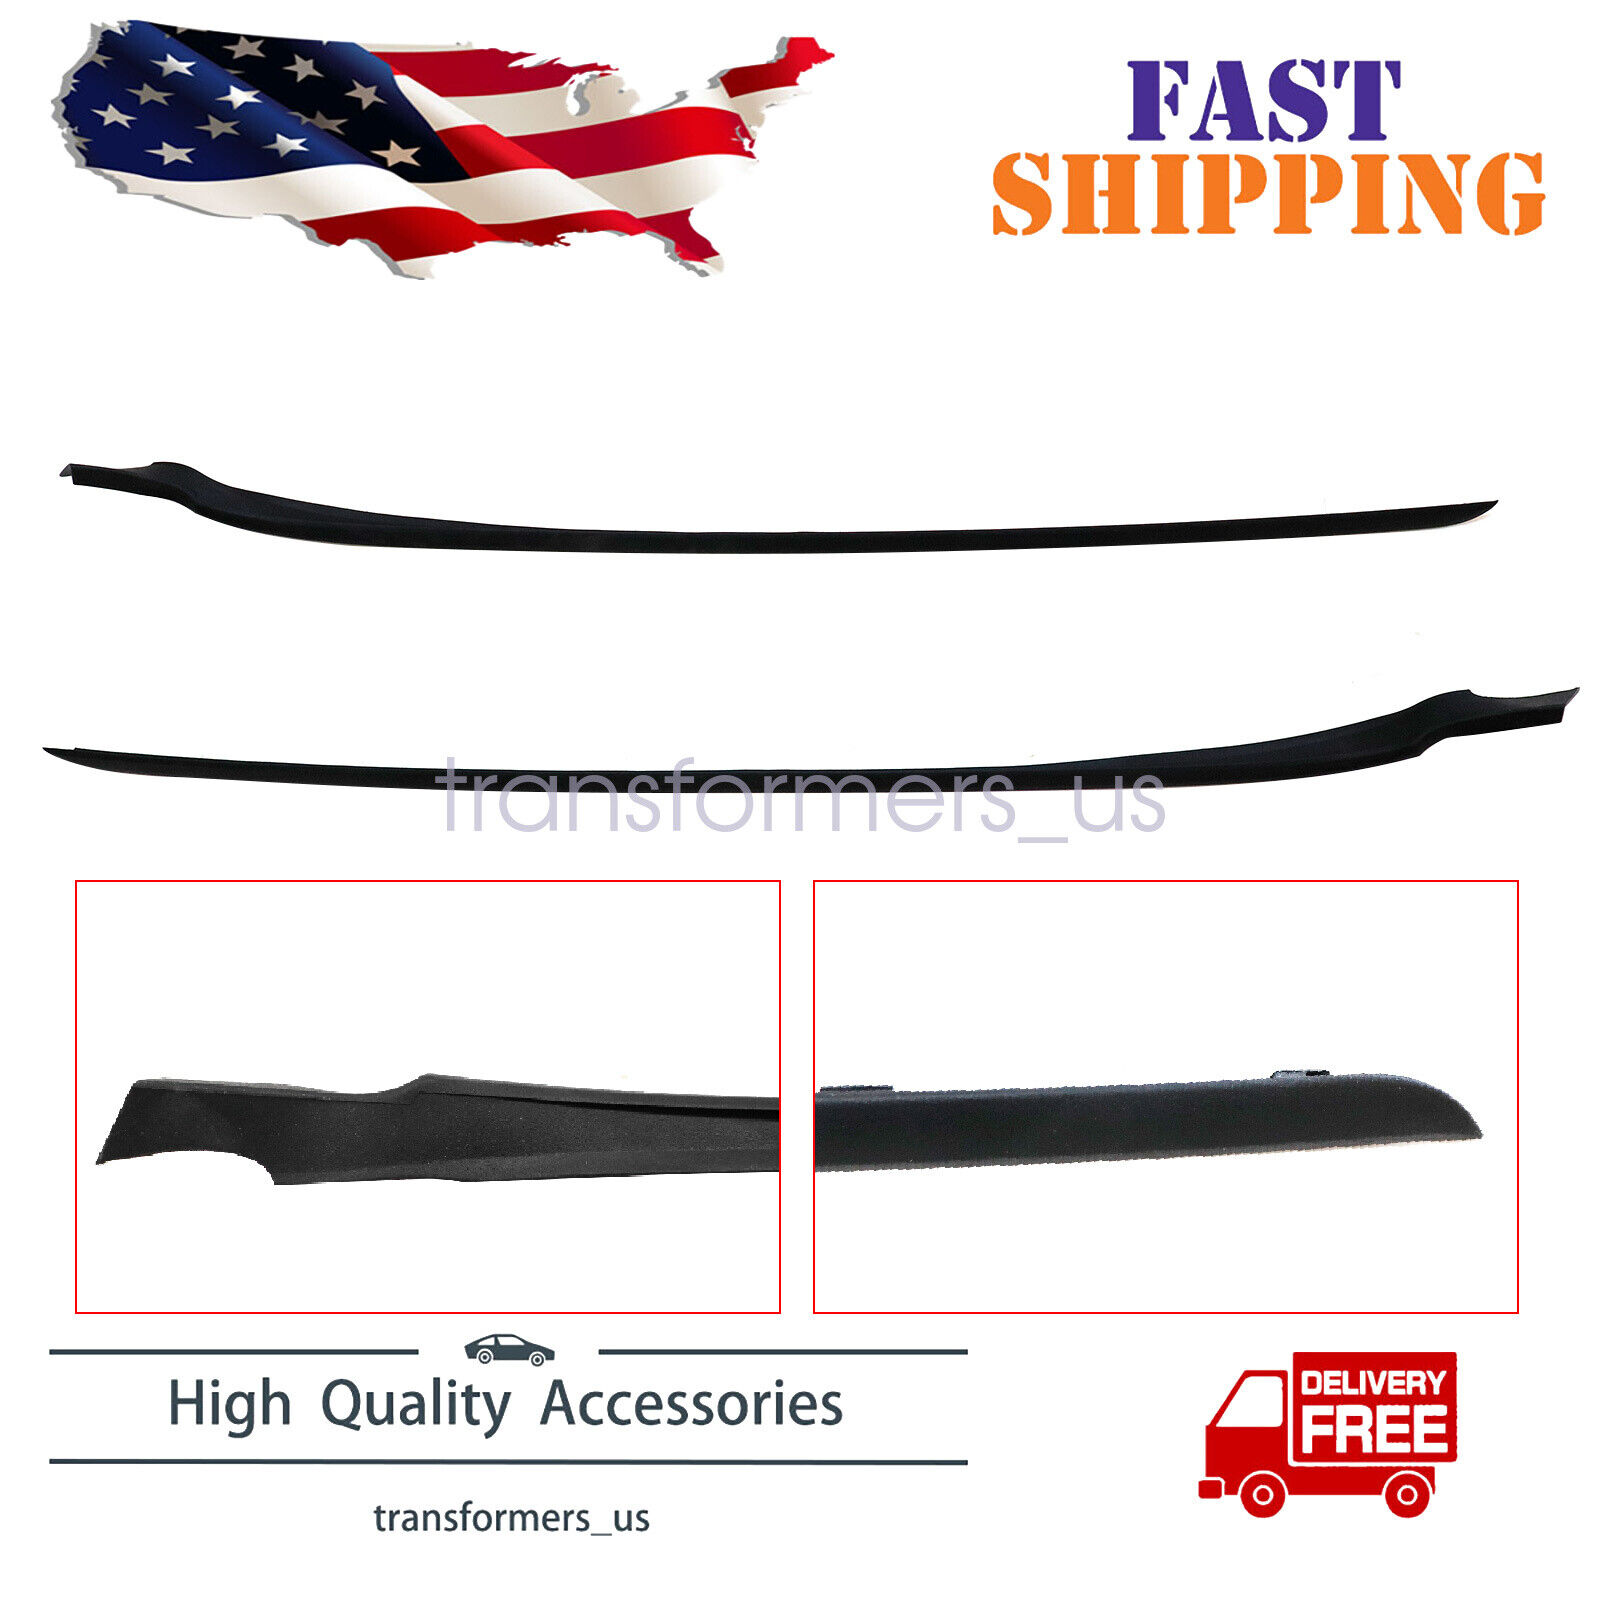 NEW For 11-19 Ford Fiesta RH+LH Windshield A-Pillar Trim Moulding PAIR Both Side